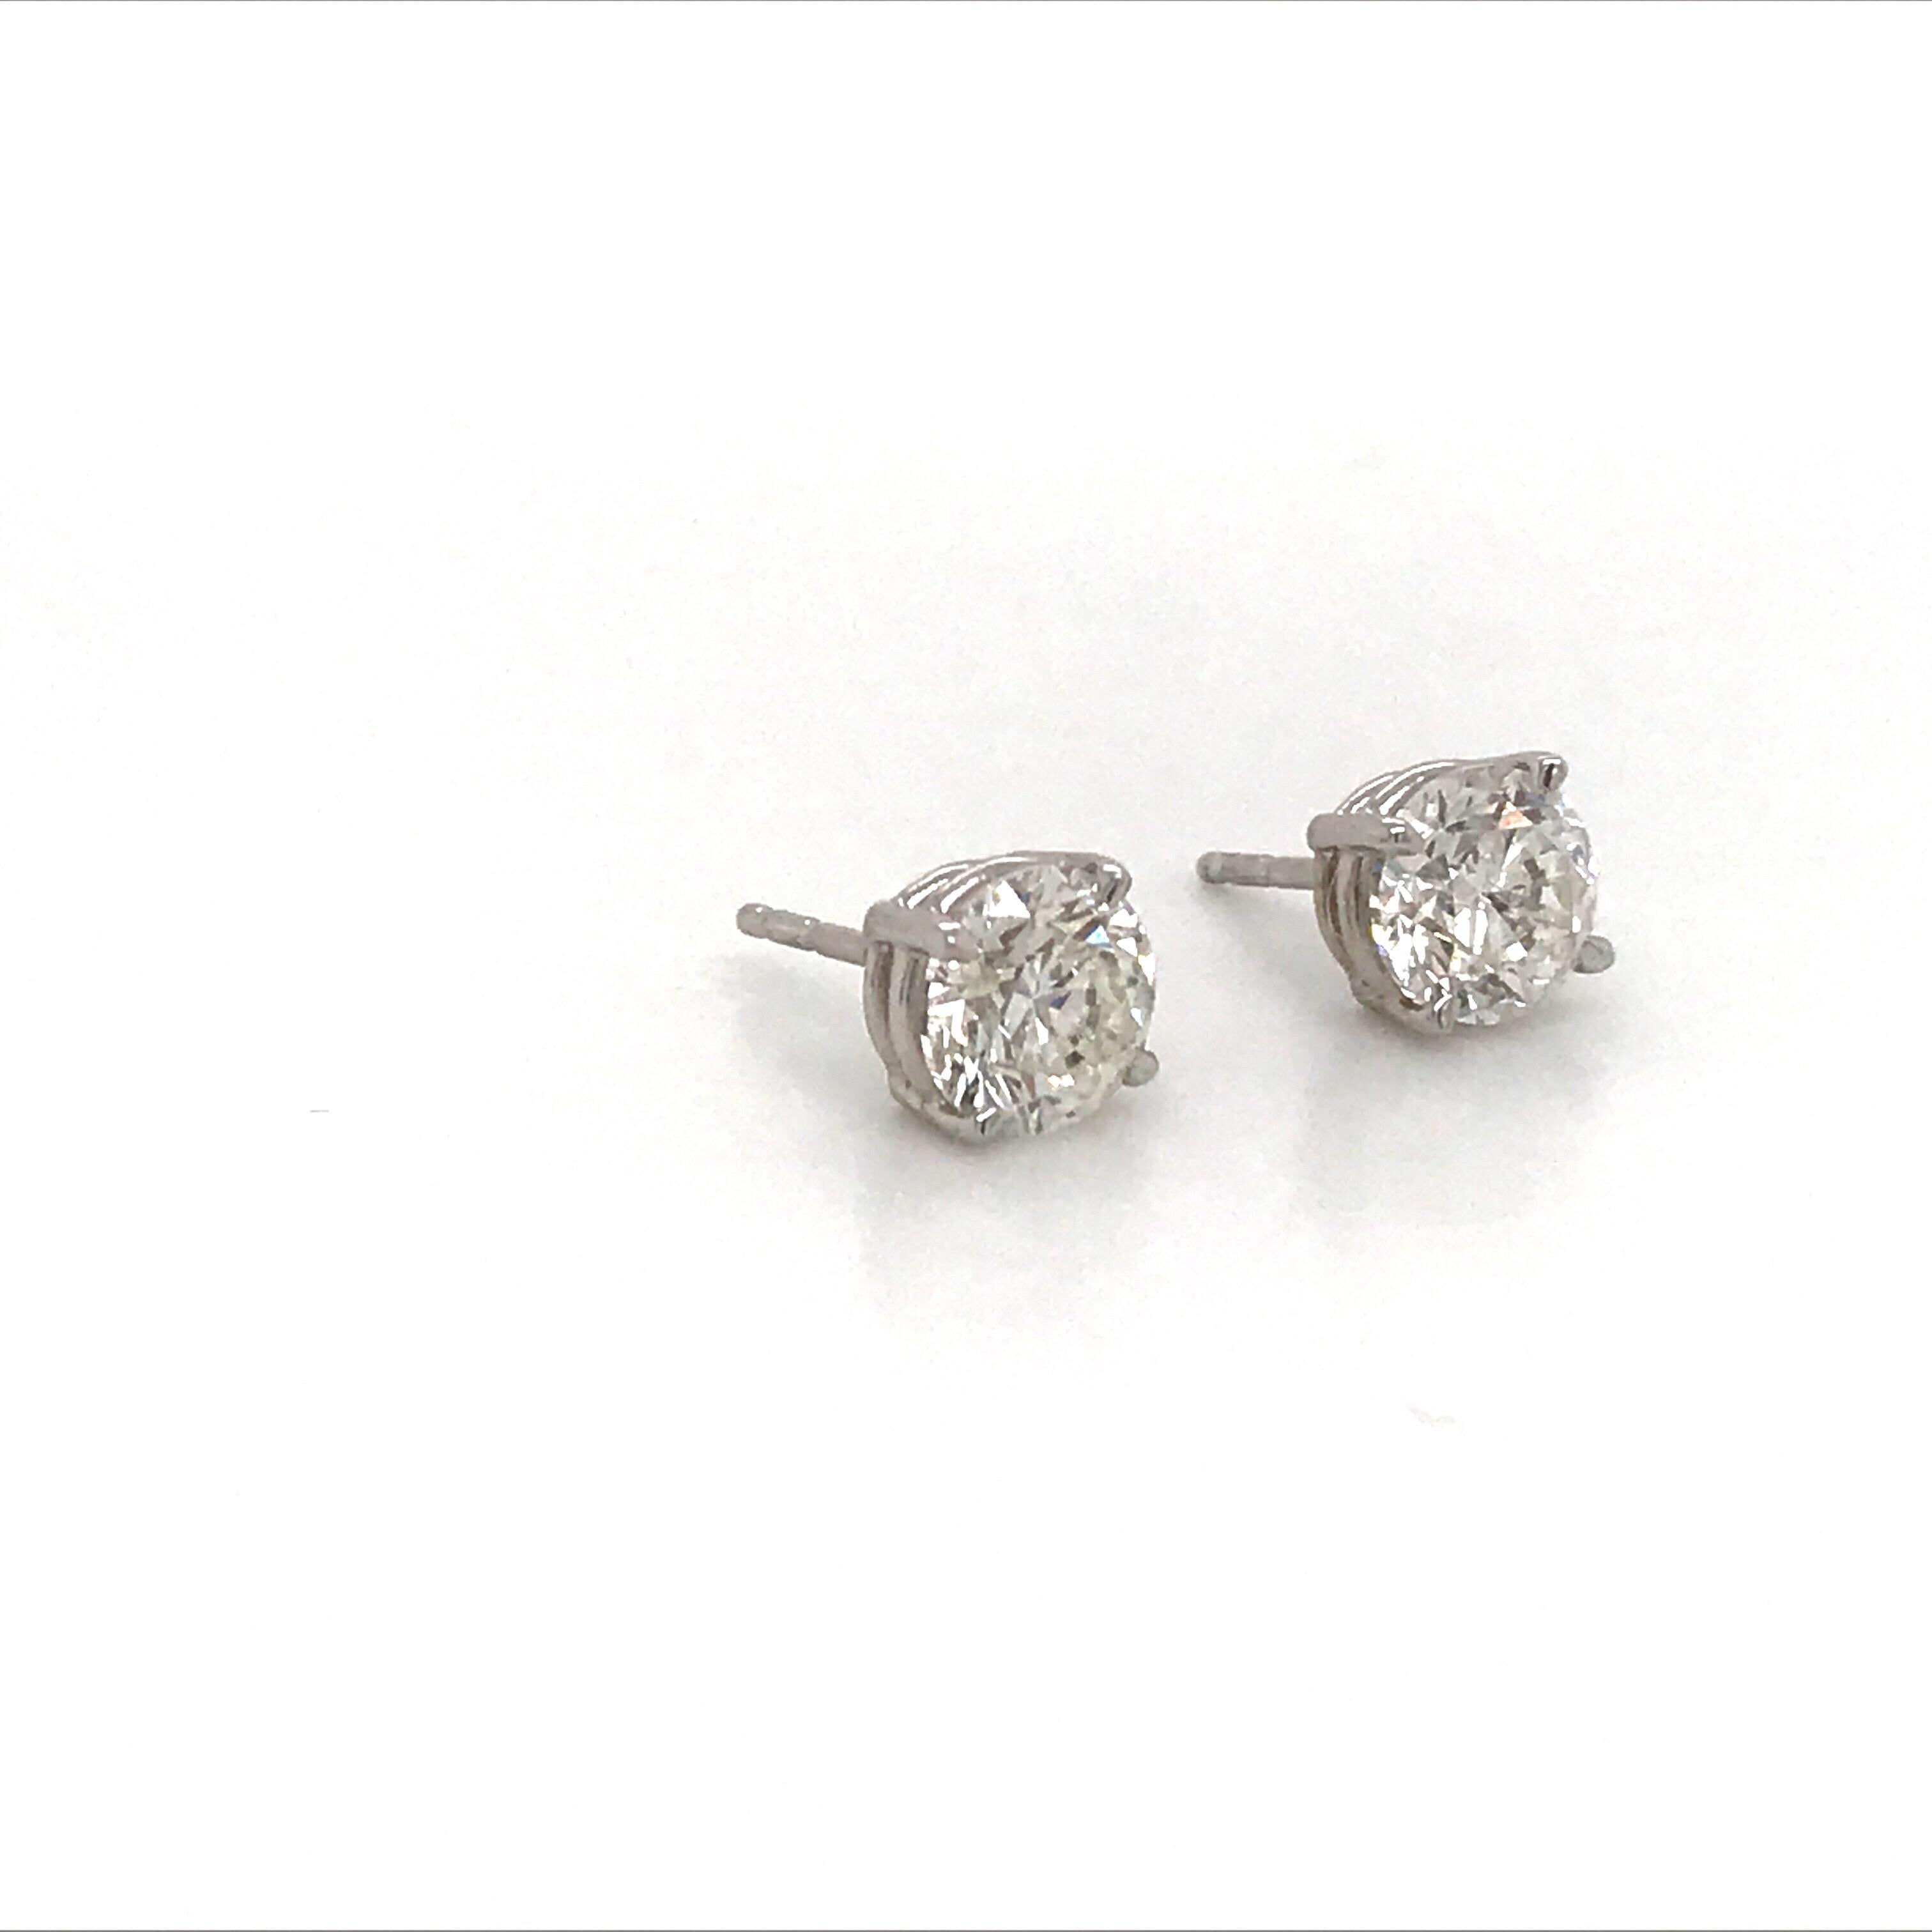 14K White gold diamond stud earrings weighing 1.80 carats in a 4 prong classic setting. Settings can be switched to martini or champagne. 
Color I-J
Clarity SI1

Brilliant pair of studs. 